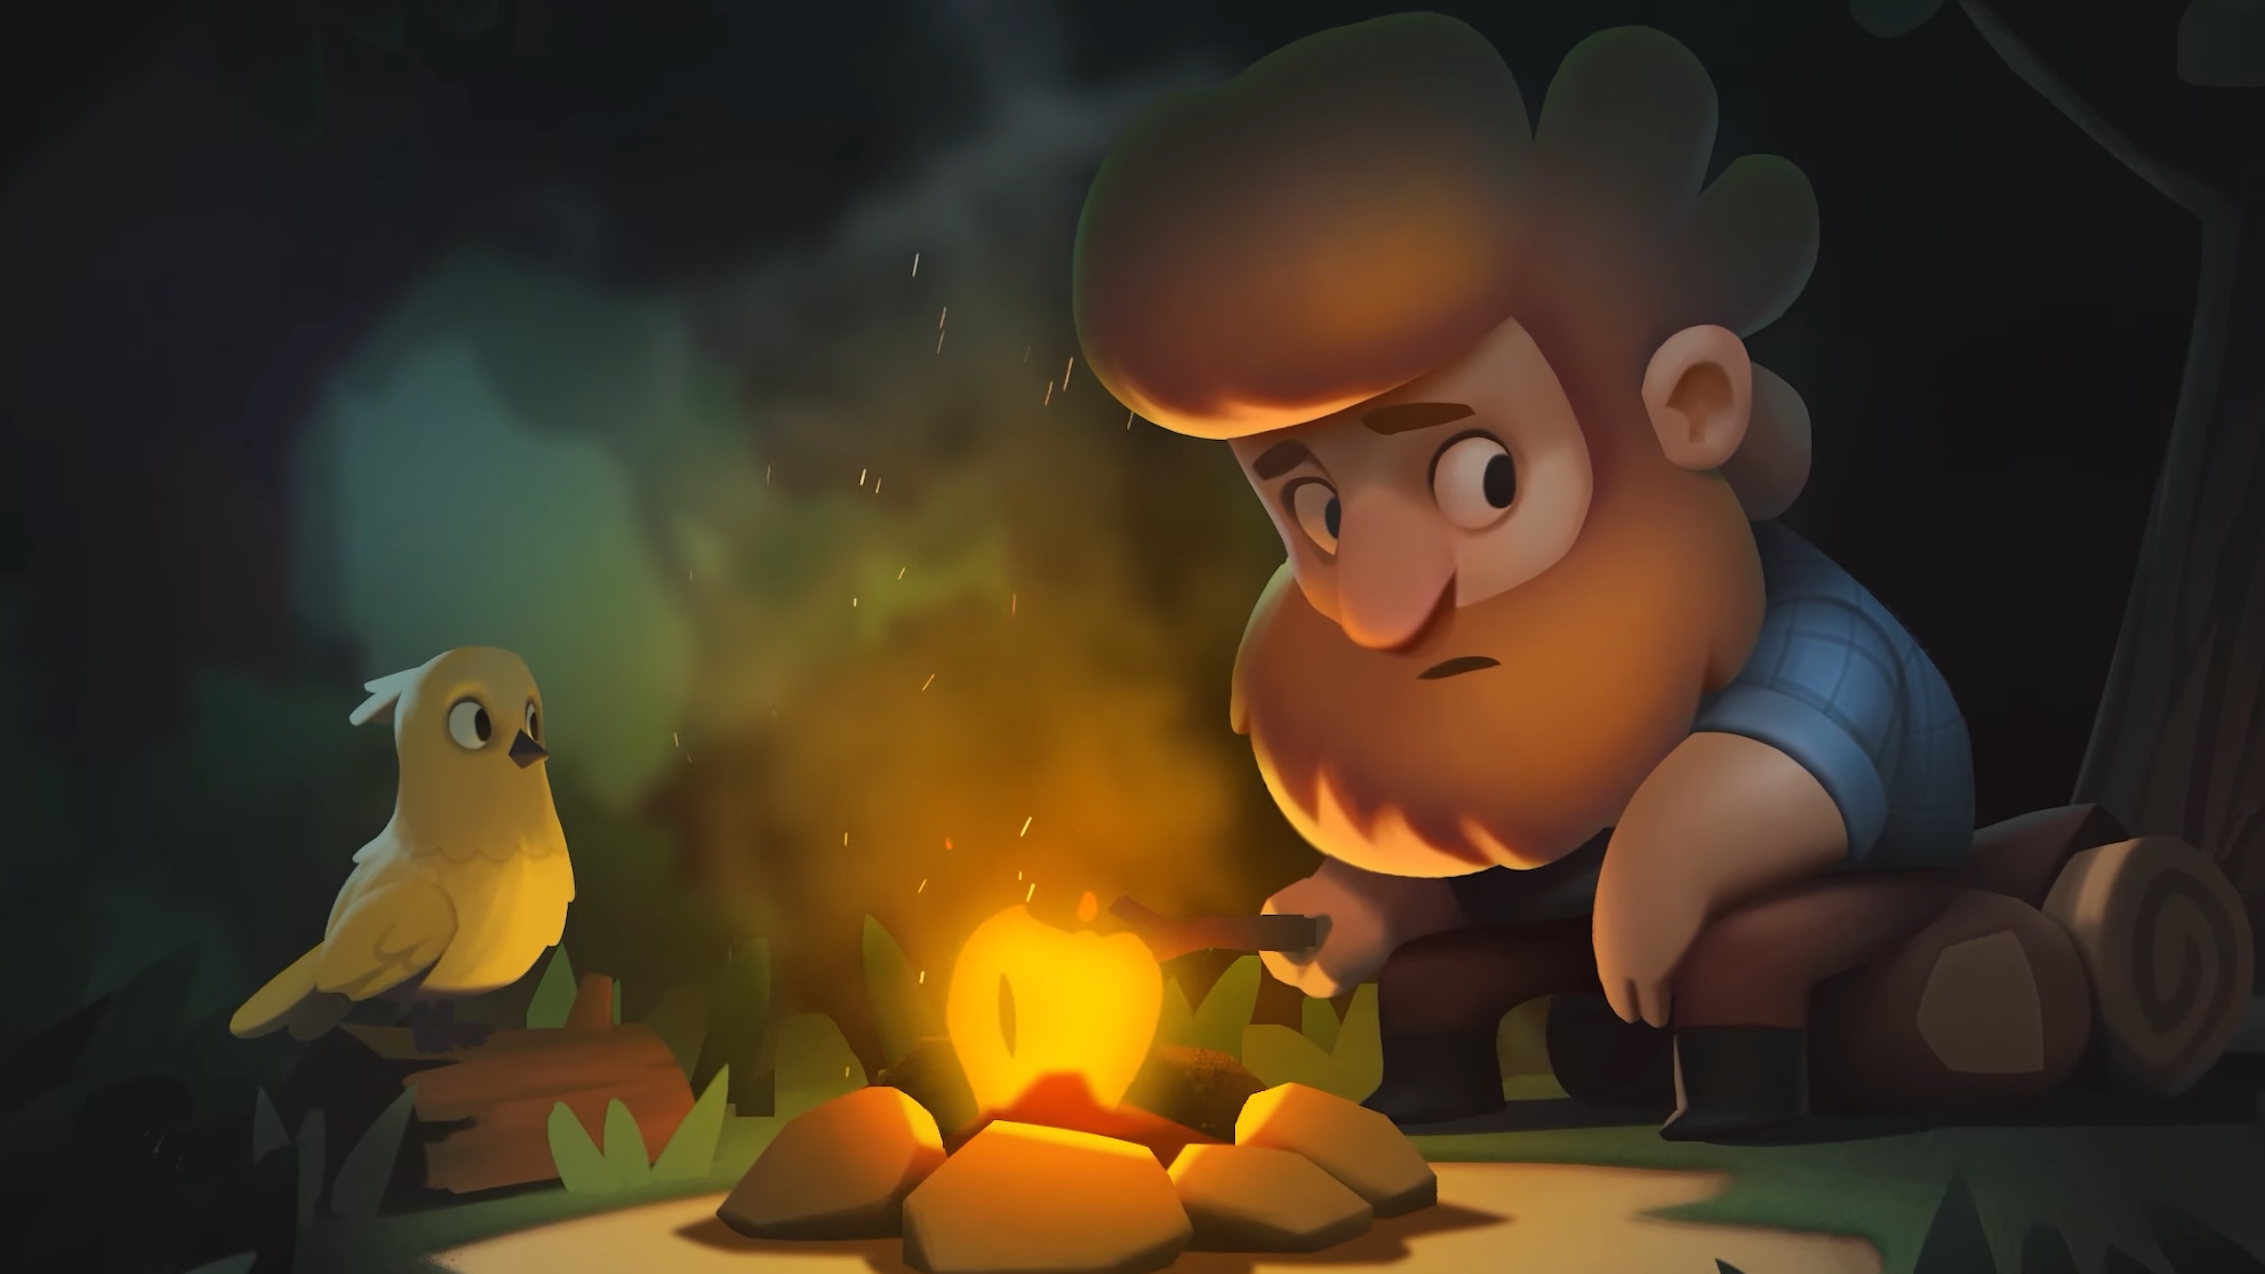 Man sitting by campfire